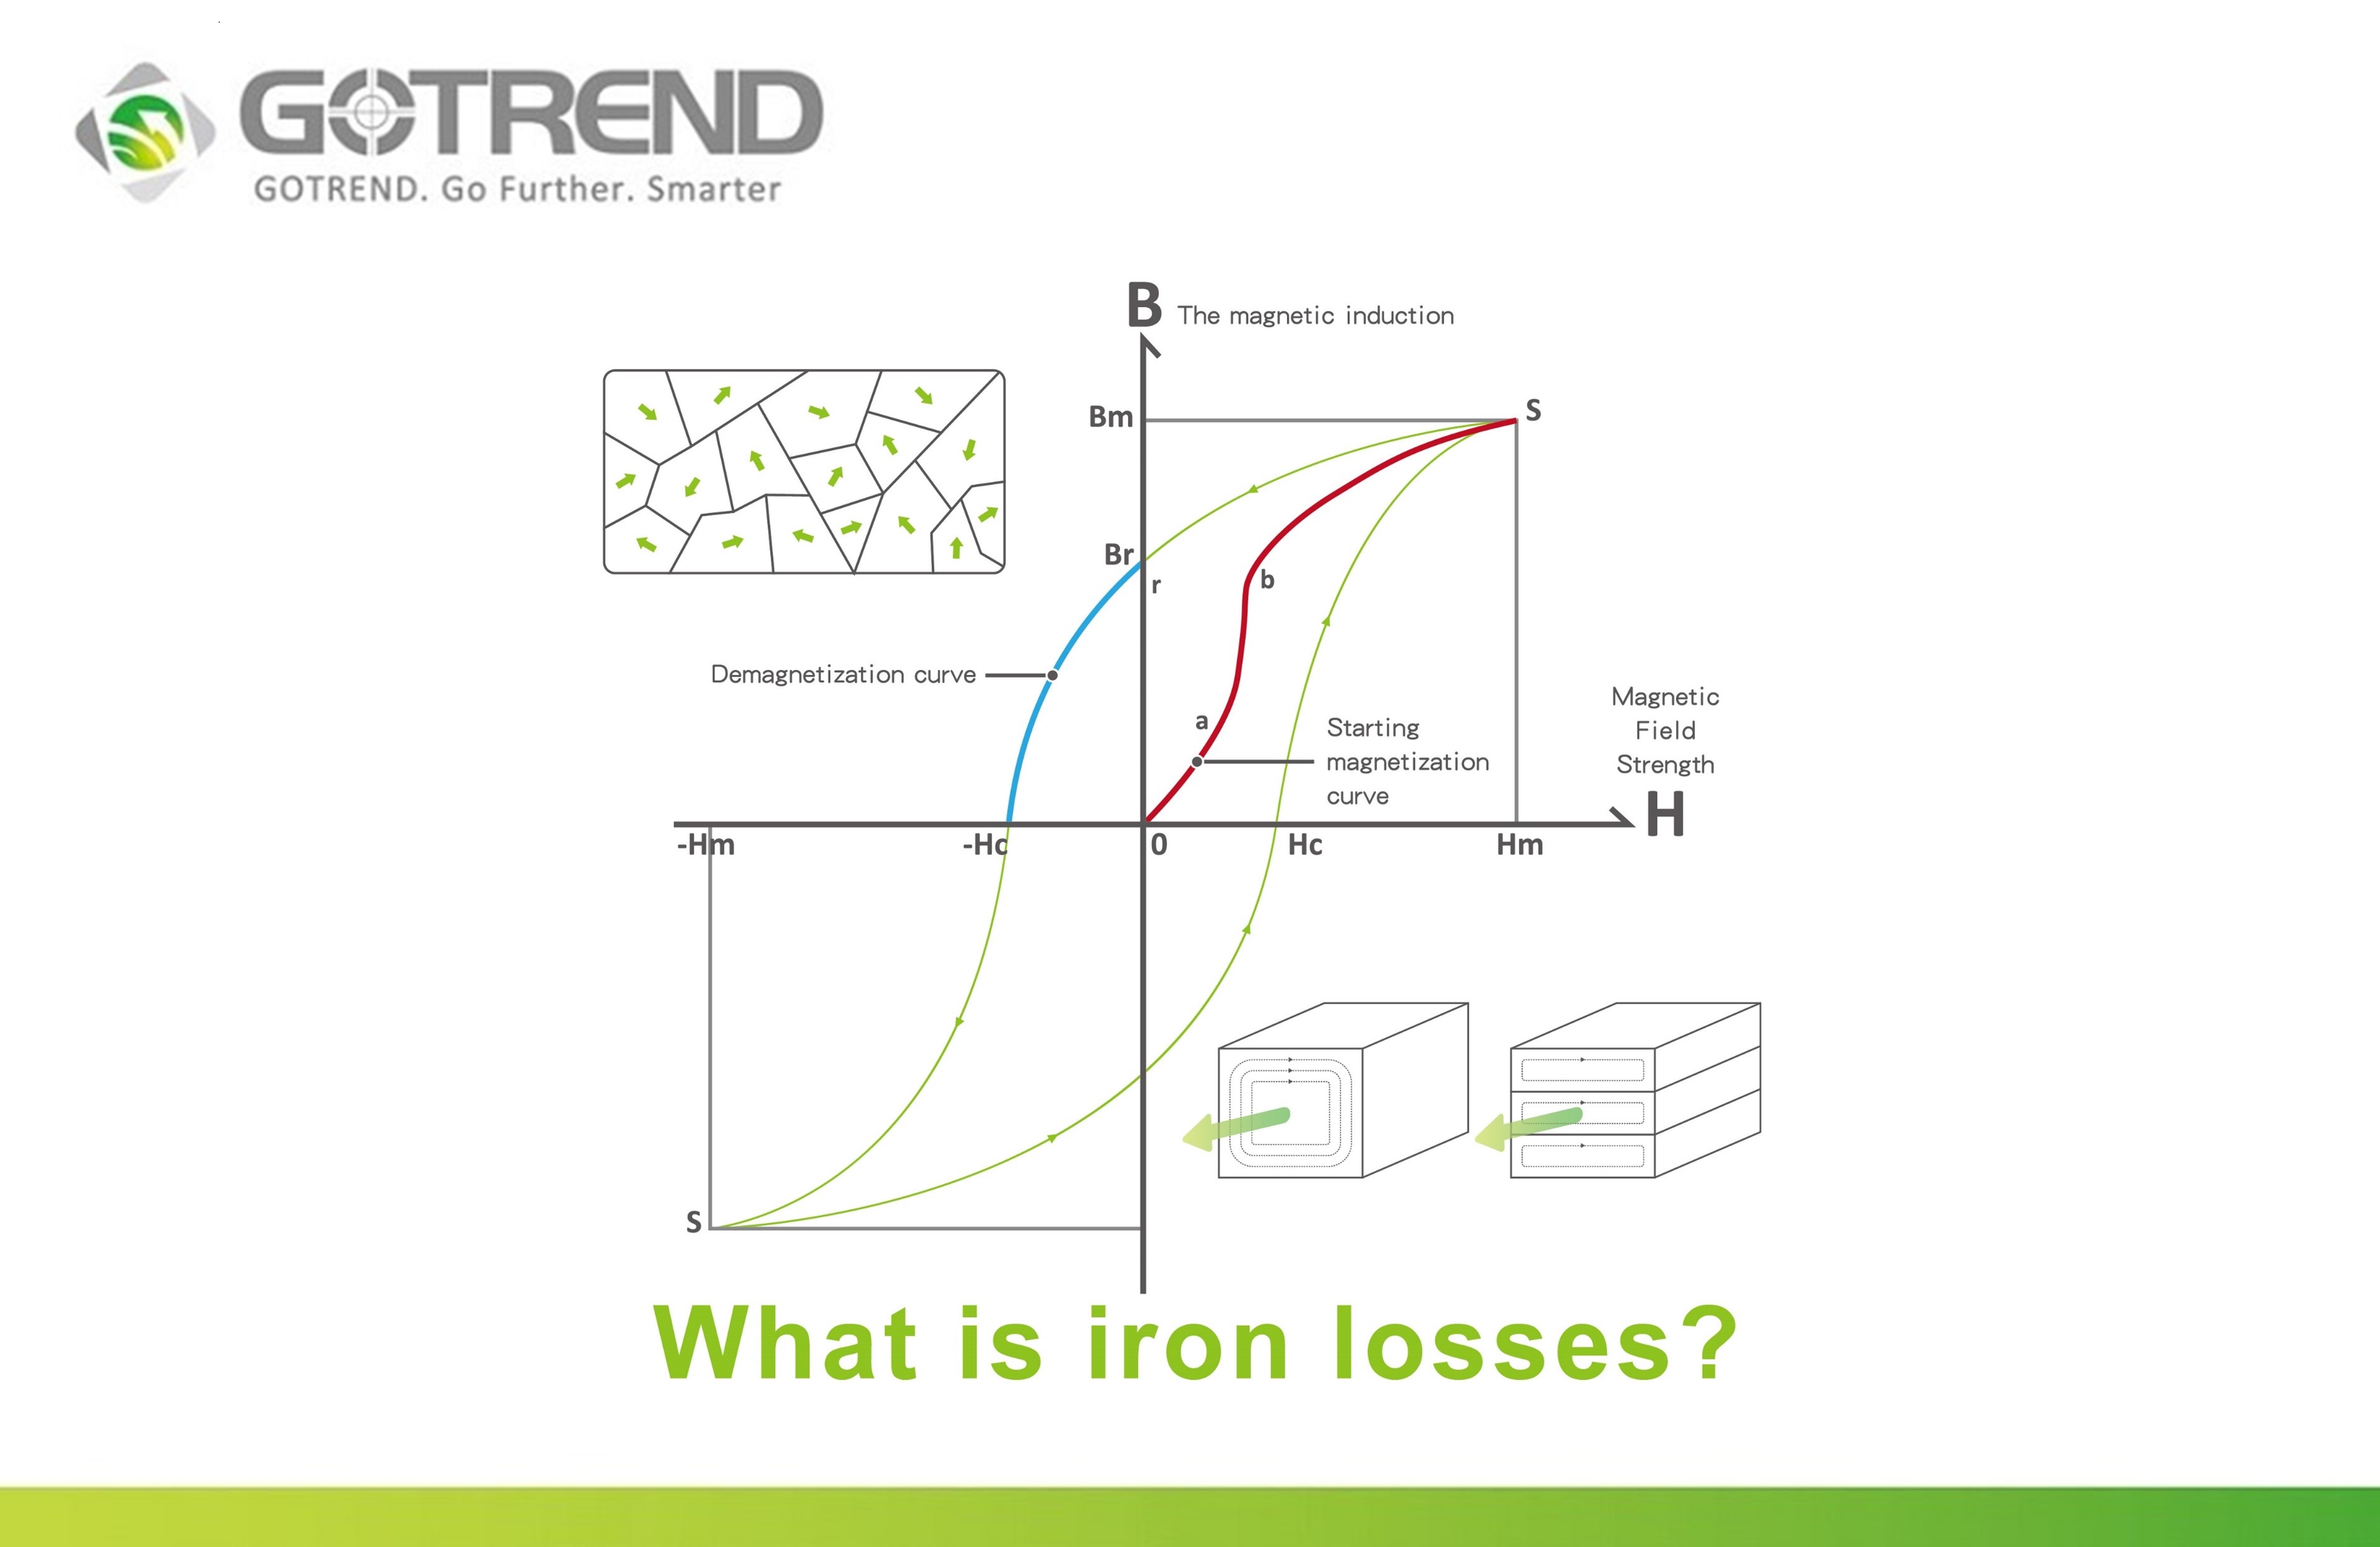 GOTREND 高創科技-技術文章-什麼是鐵損?磁滯損與渦流損介紹What is iron loss? Introduction to hysteresis loss and eddy current loss.